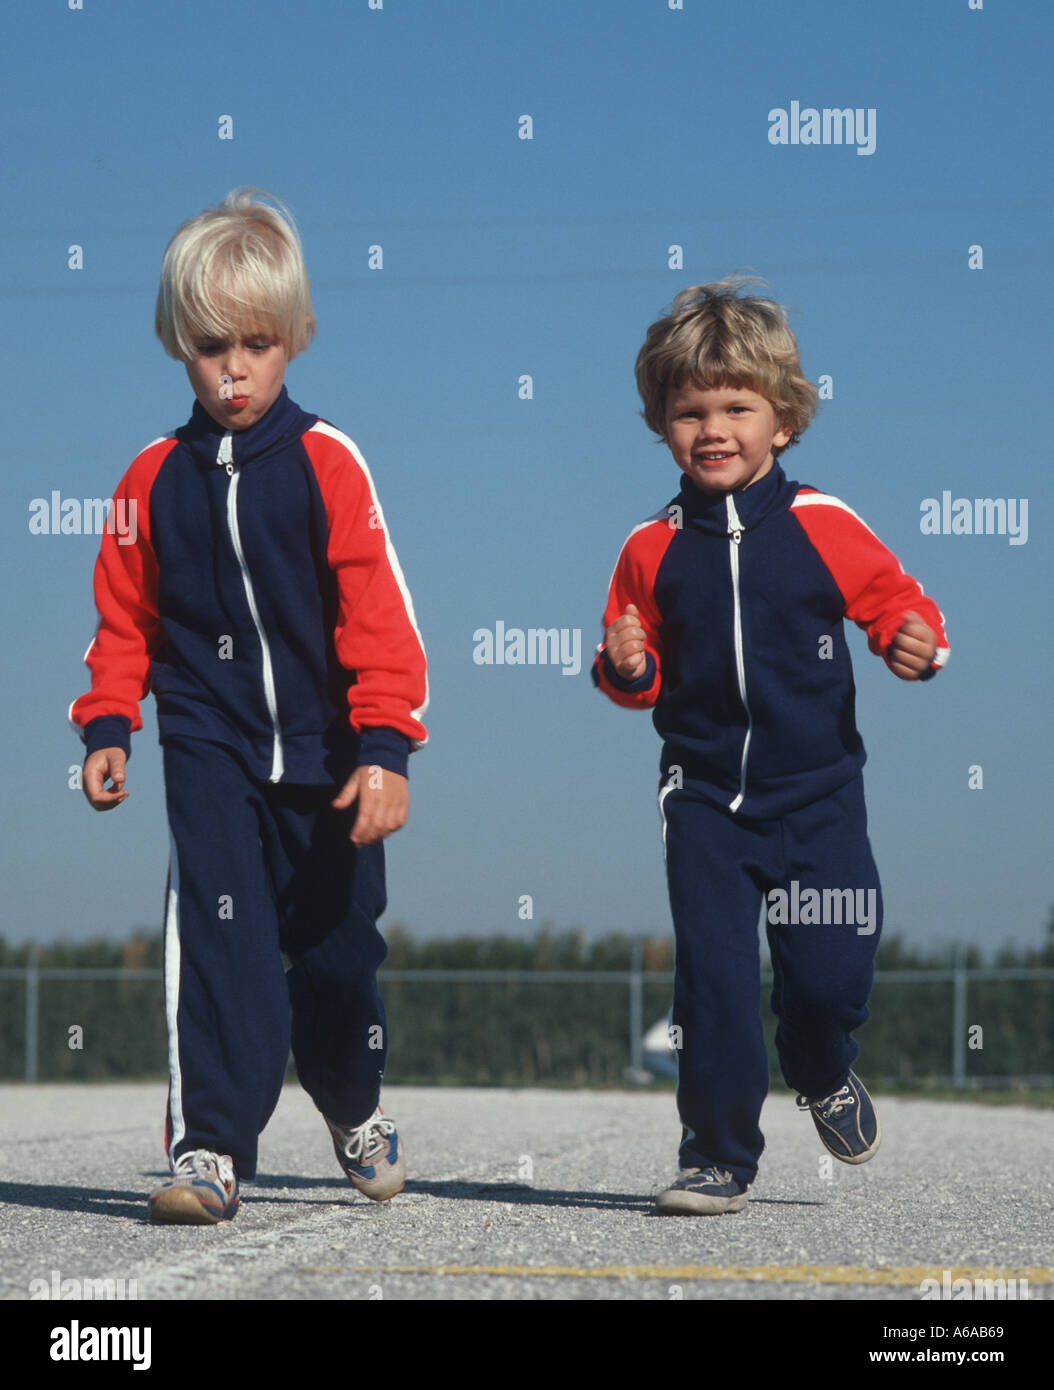 small boy and girl jogging on track Stock Photo